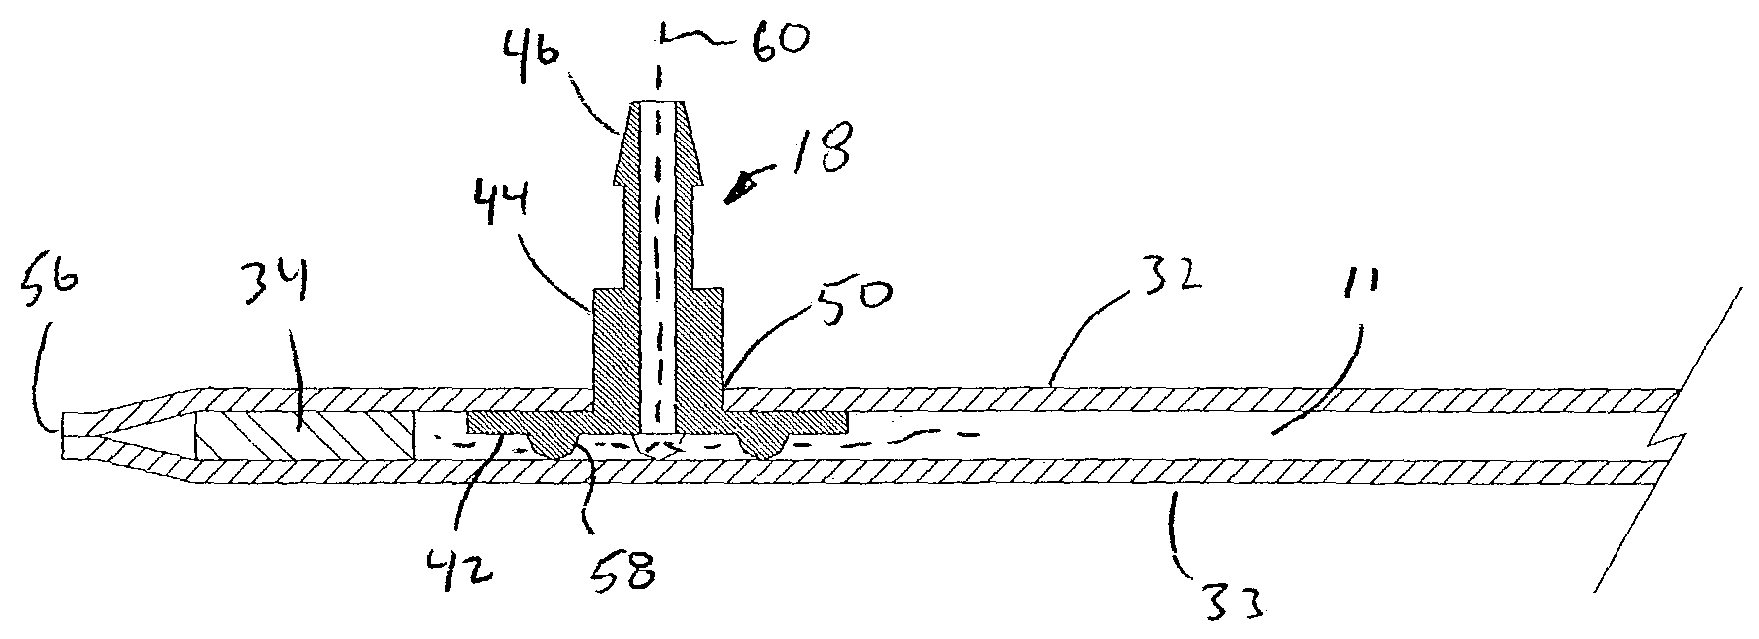 Fluid warming cassette and system capable of operation under negative pressure